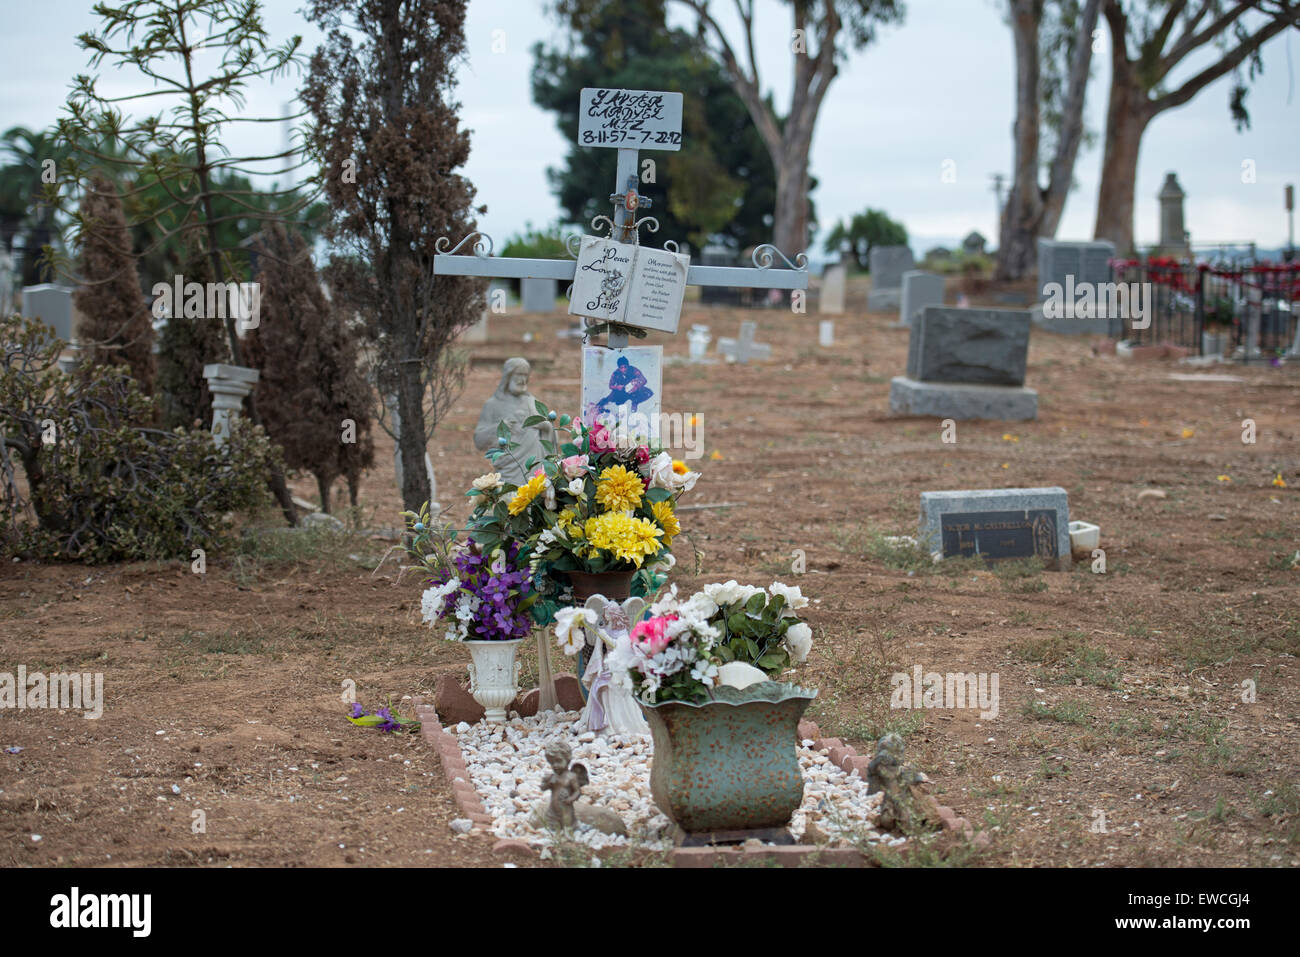 Cemetery Grounds, and Shrine to deceased, La Vista Memorial Park, National City, California Stock Photo